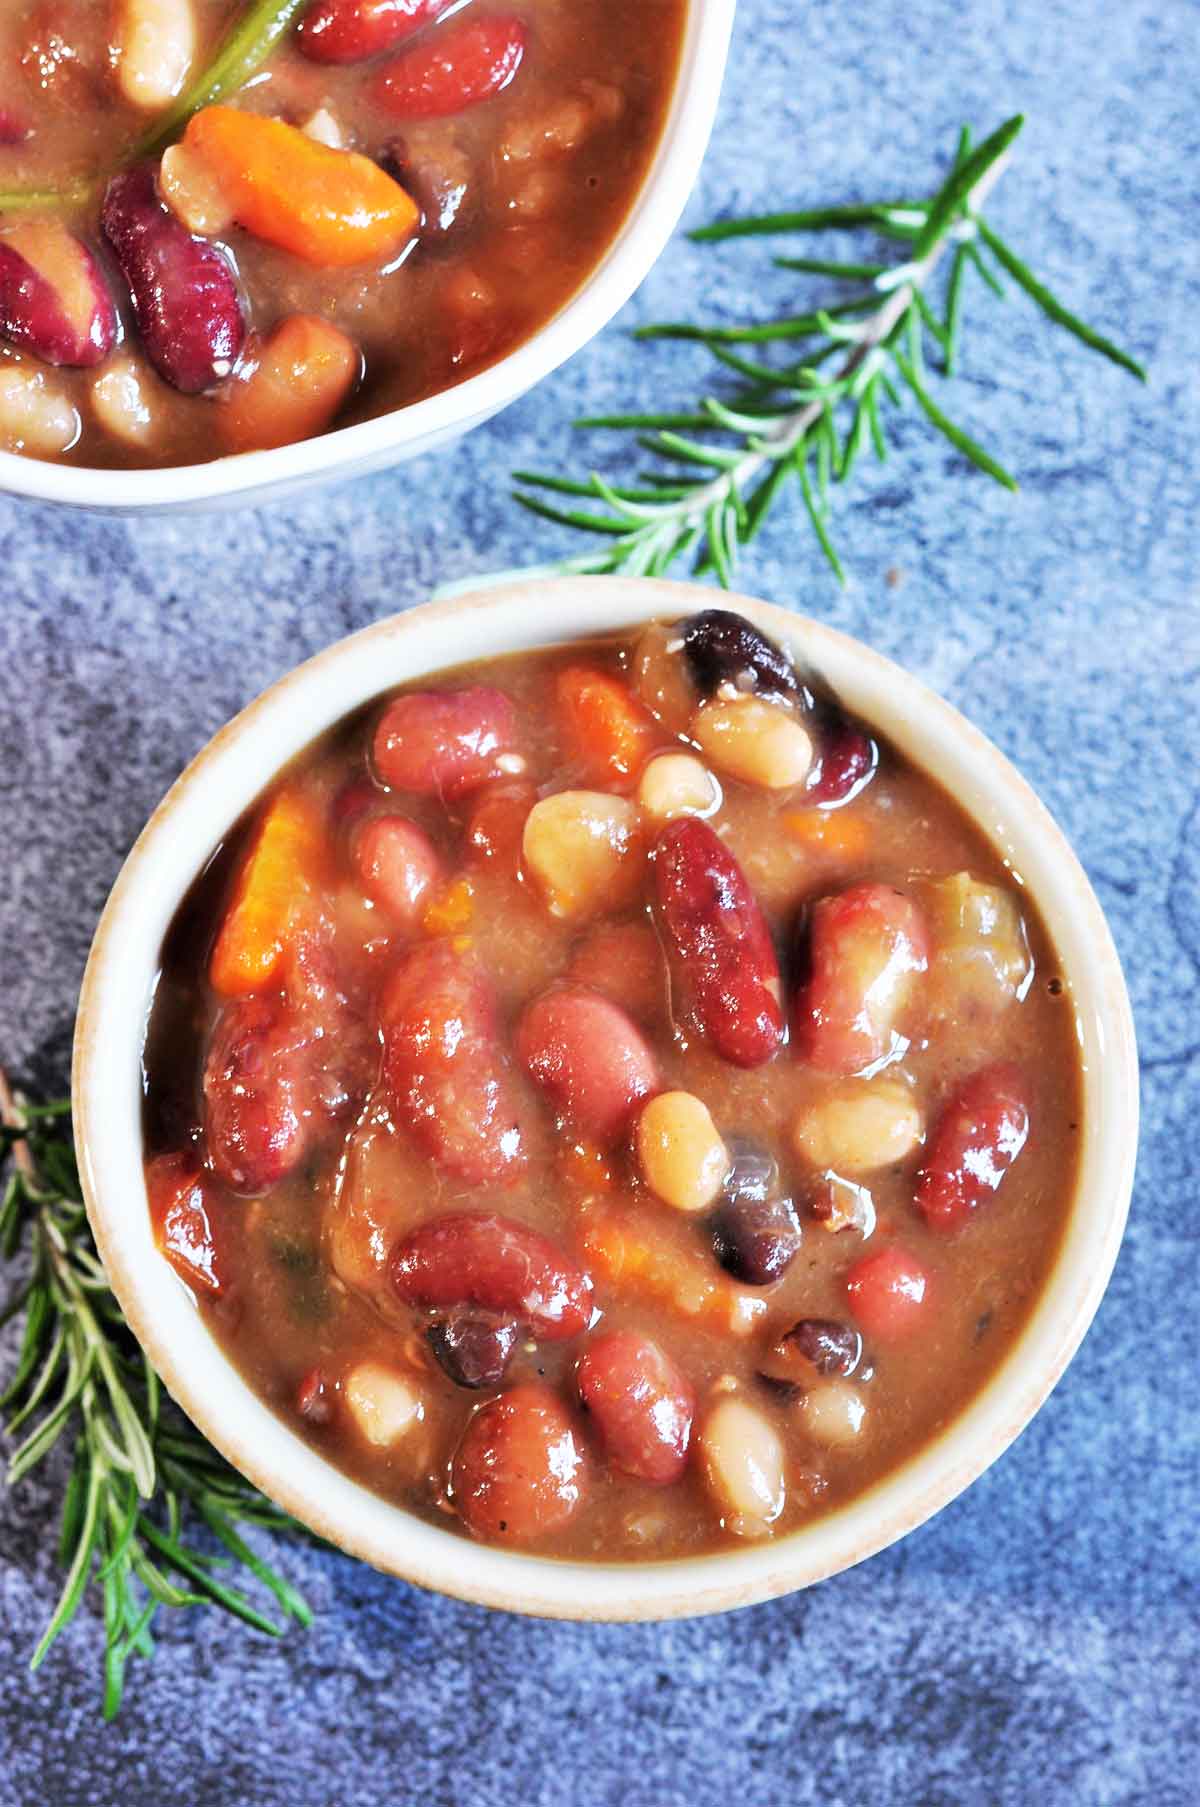 Mixed Beans Soup in a bowl.